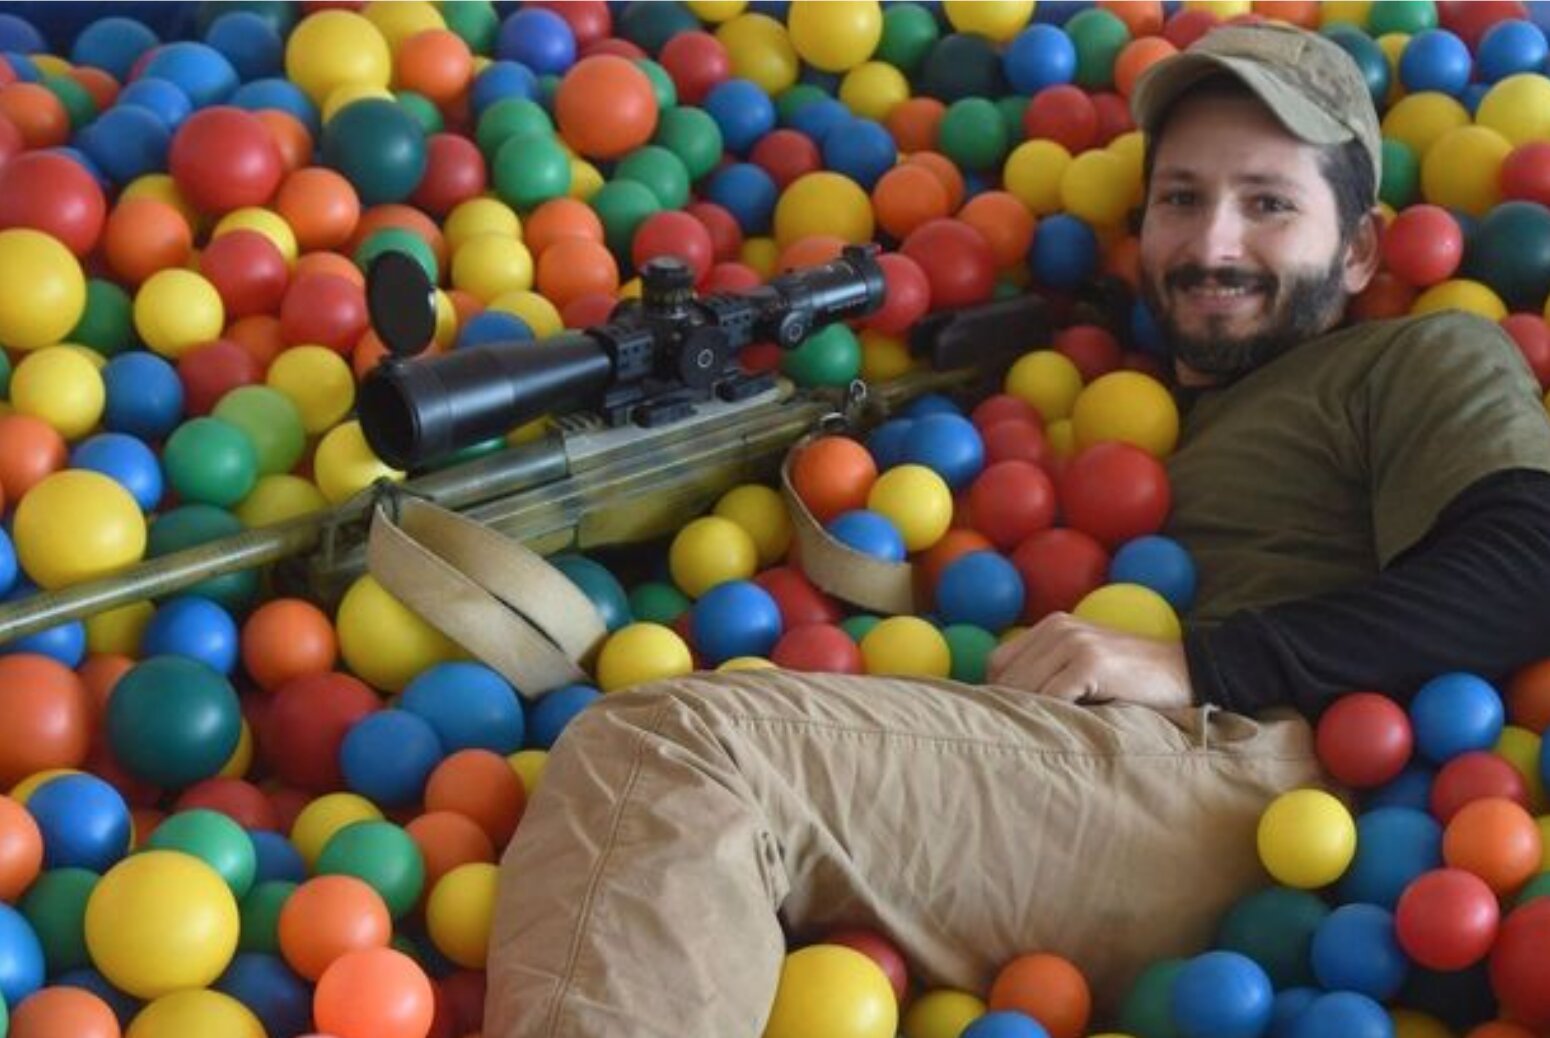 Canadian sniper ‘Wali’ expertly conceals himself in a ball pit. Photo courtesy of We Are The Mighty.